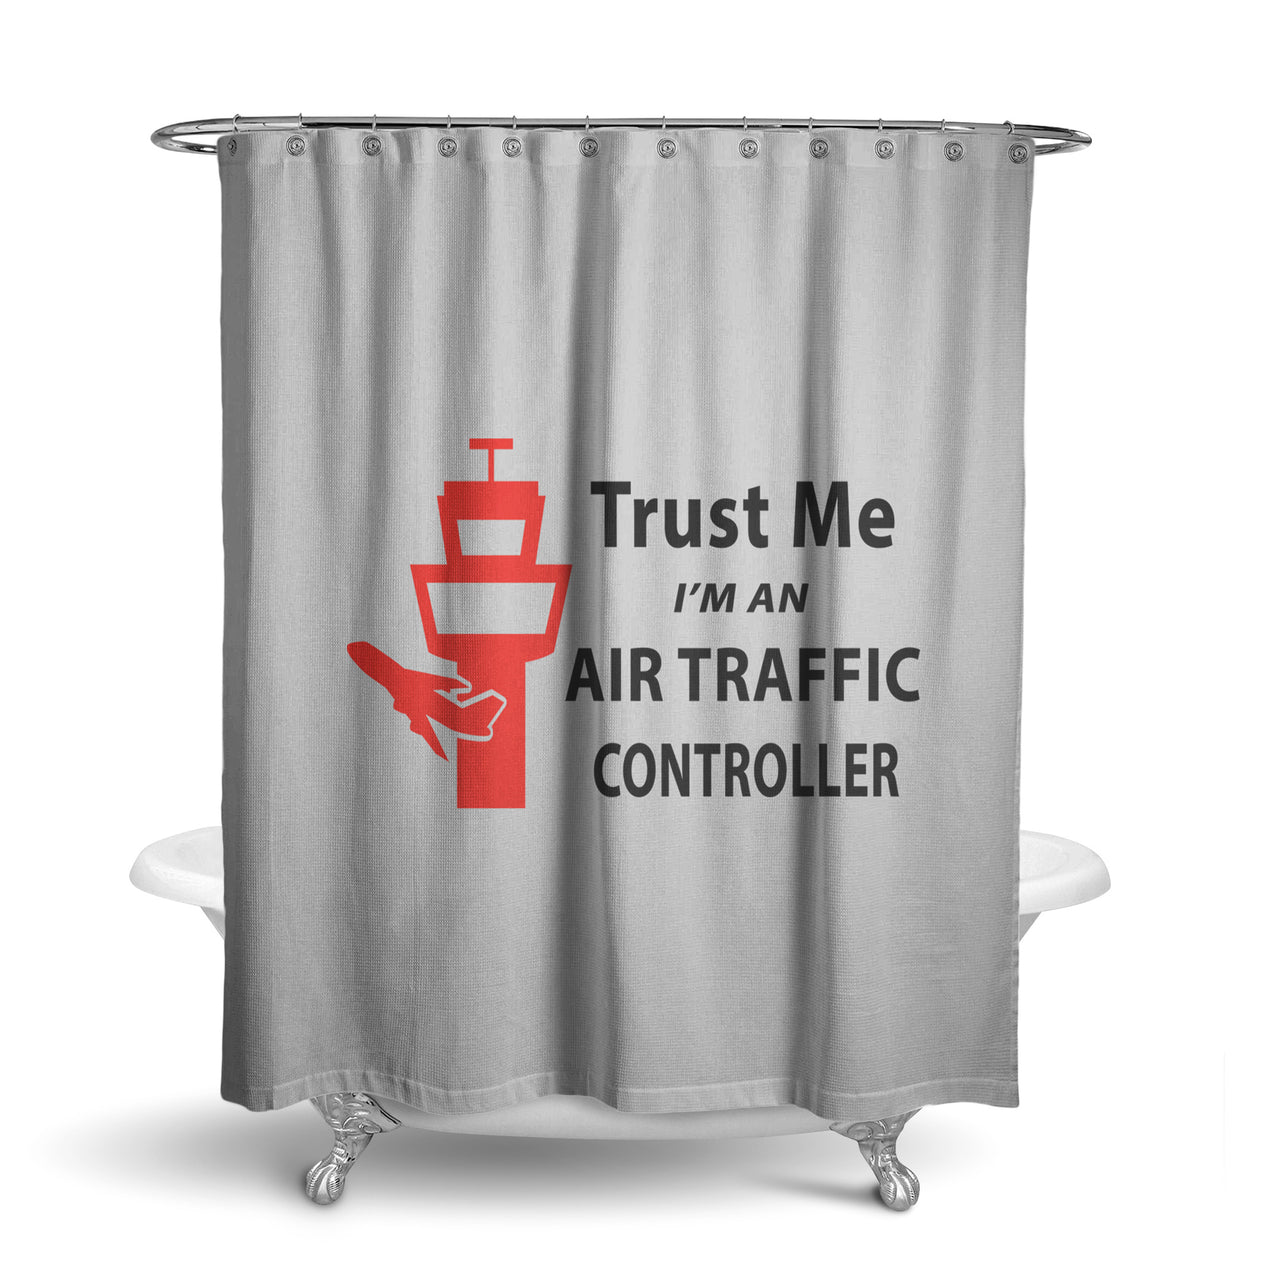 Trust Me I'm an Air Traffic Controller Designed Shower Curtains